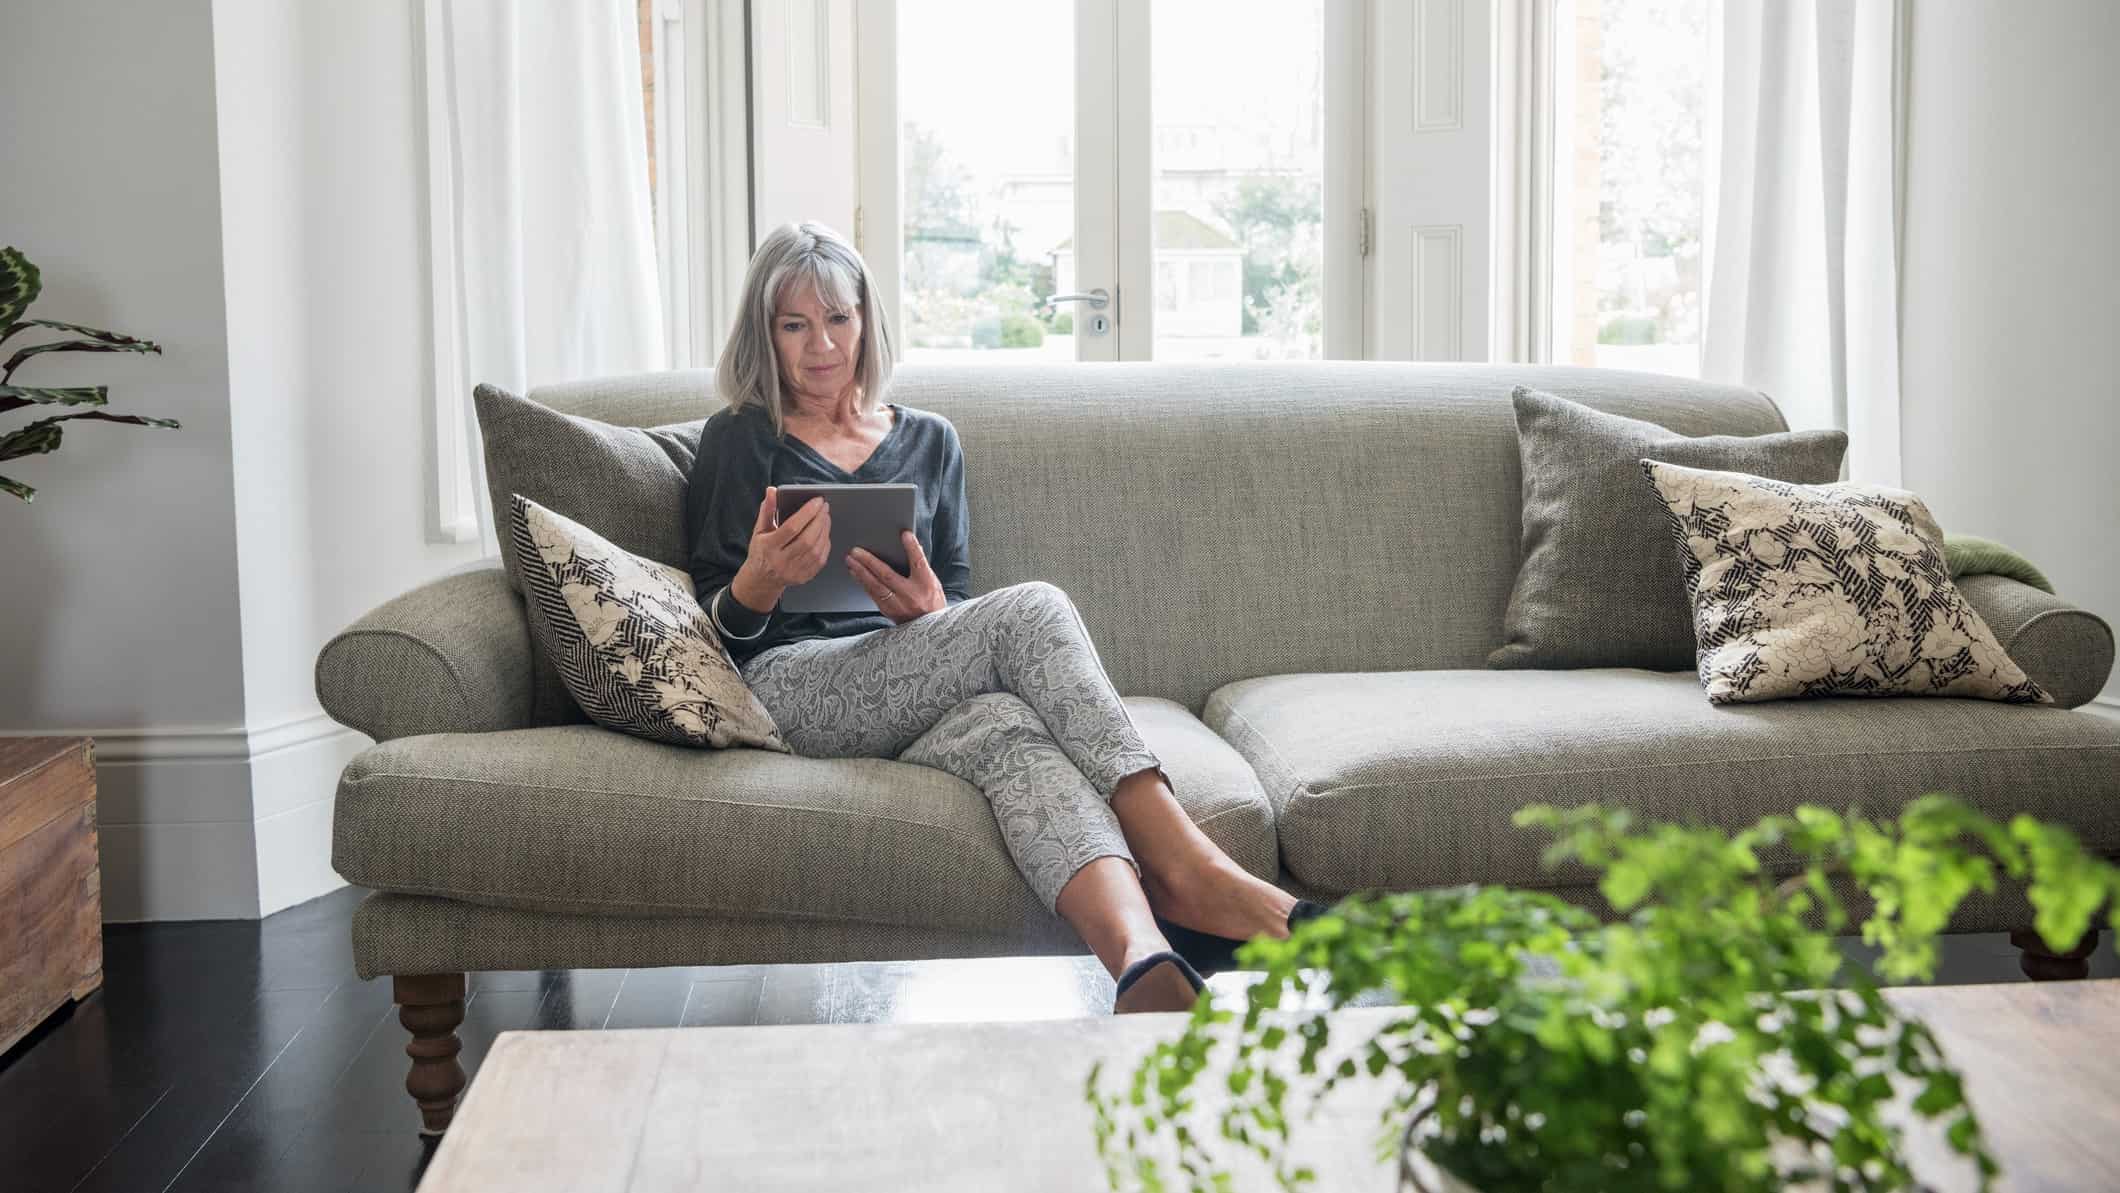 a woman sits amid a stylish home setting on a sofa with plush cushions with a coffee table and plant in the foreground while she peruses a tablet device.